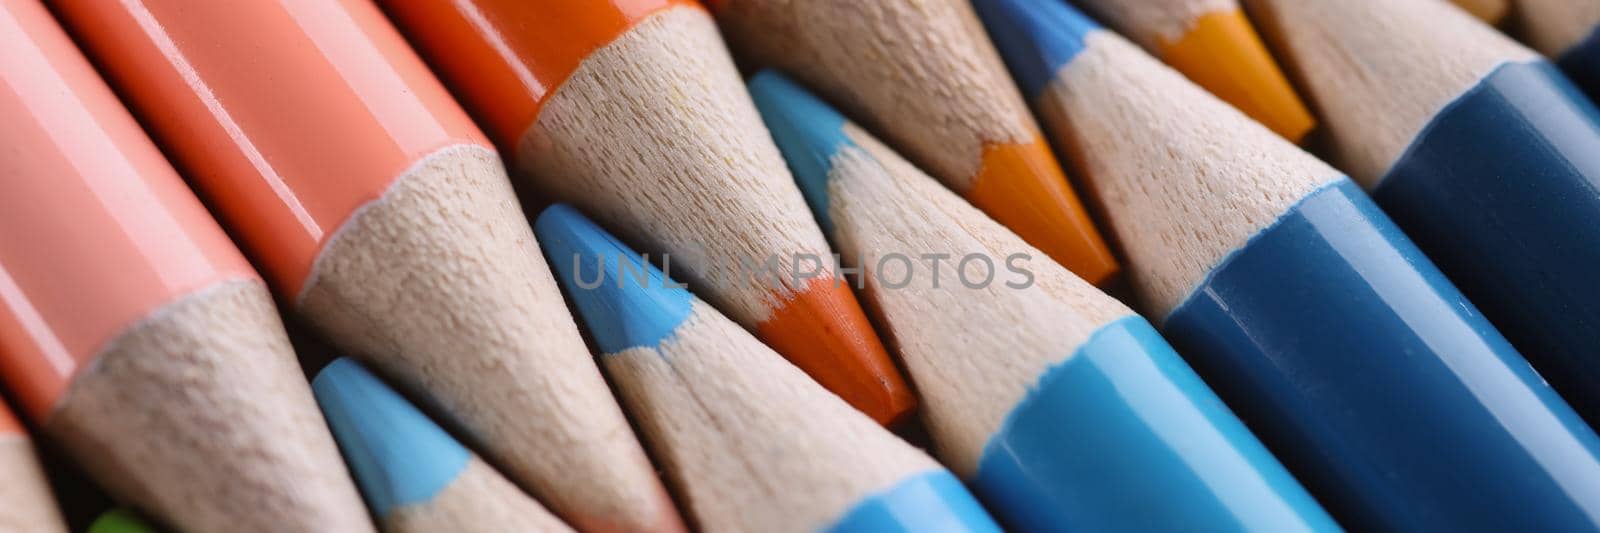 Close-up of multi colored pencils for drawing placed horizontally with tips to each other, group of tools for painting, shades of orange and blue. Art, design, creativity, hobby concept